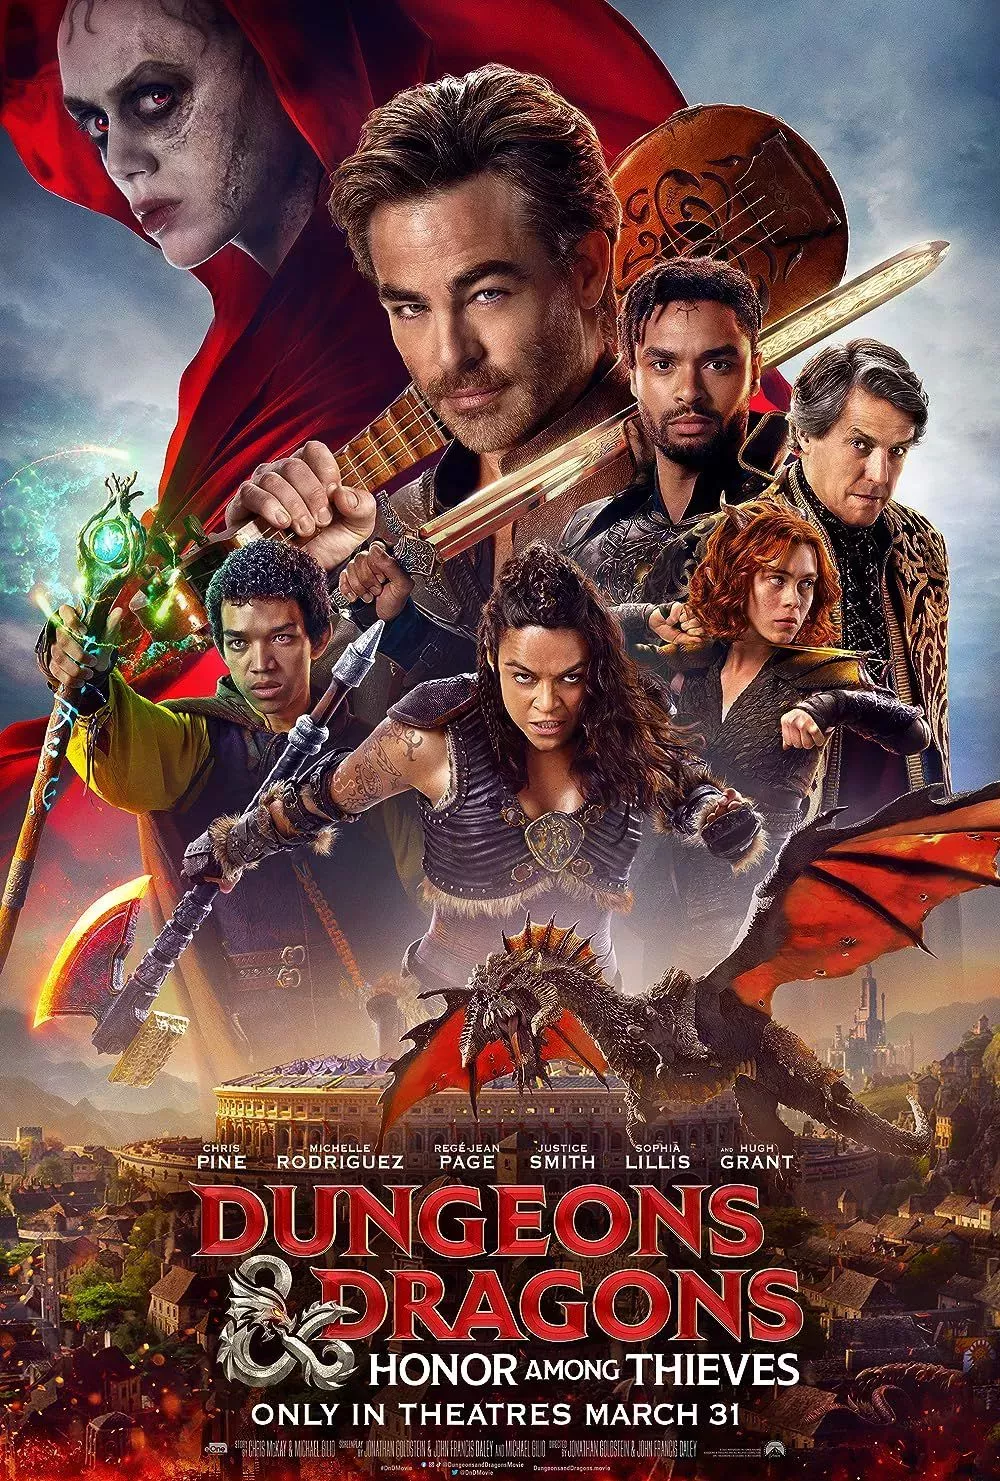 Poster of the Dungeons and Dragons Honor among Thieves film